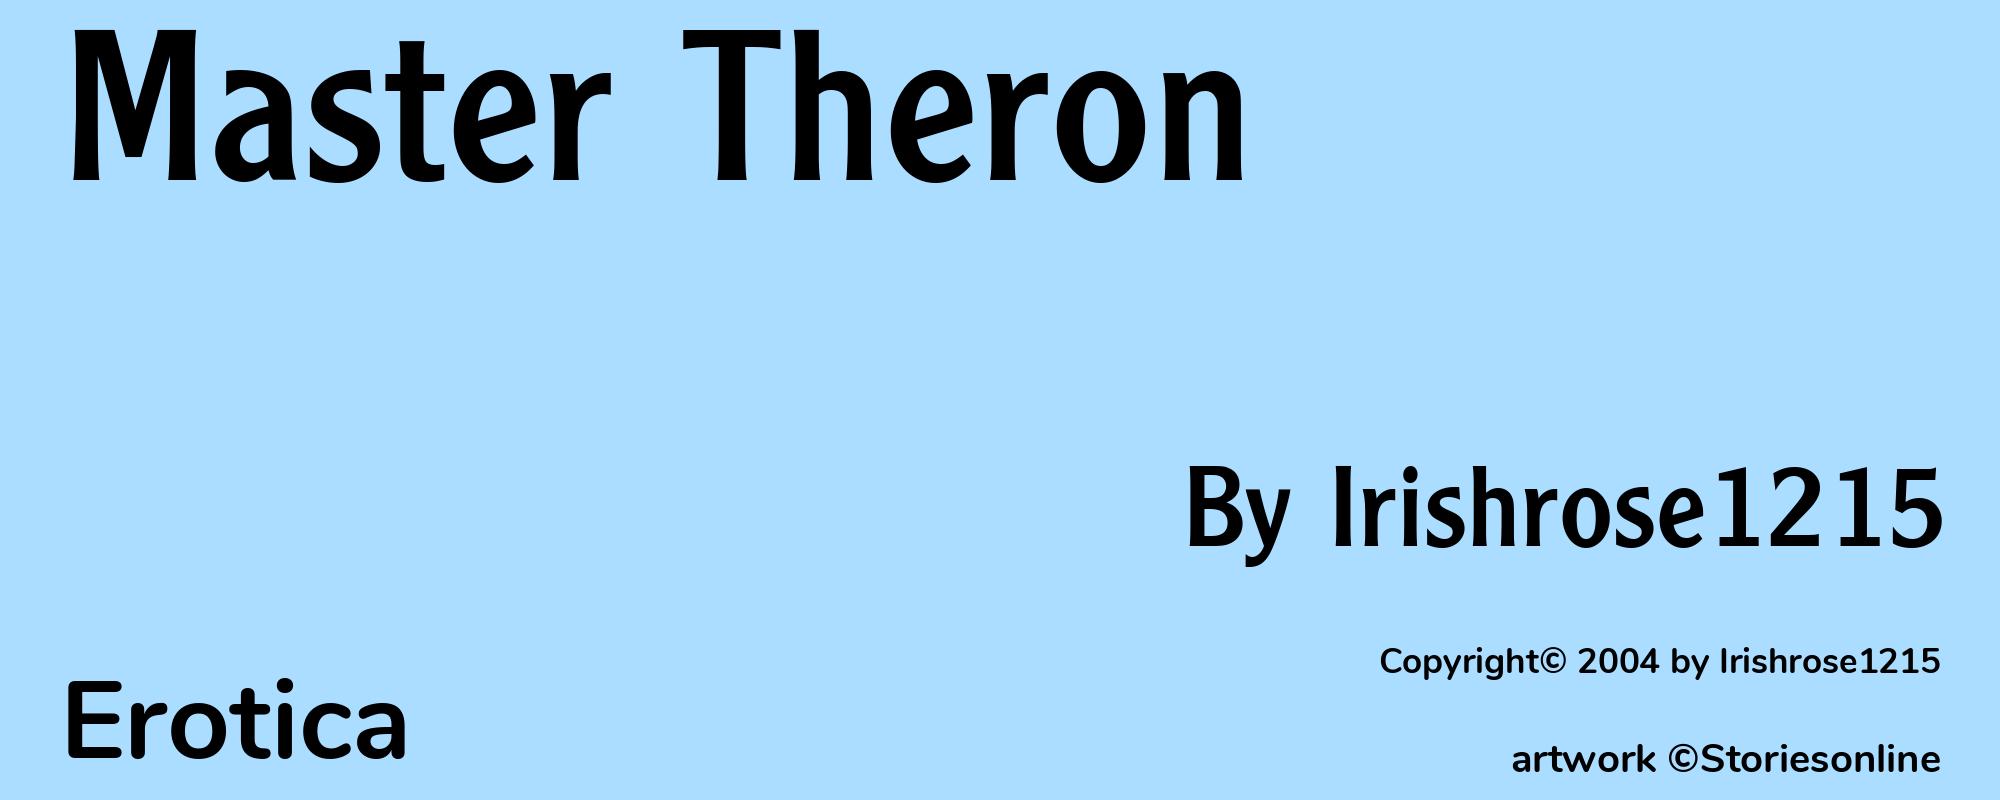 Master Theron - Cover